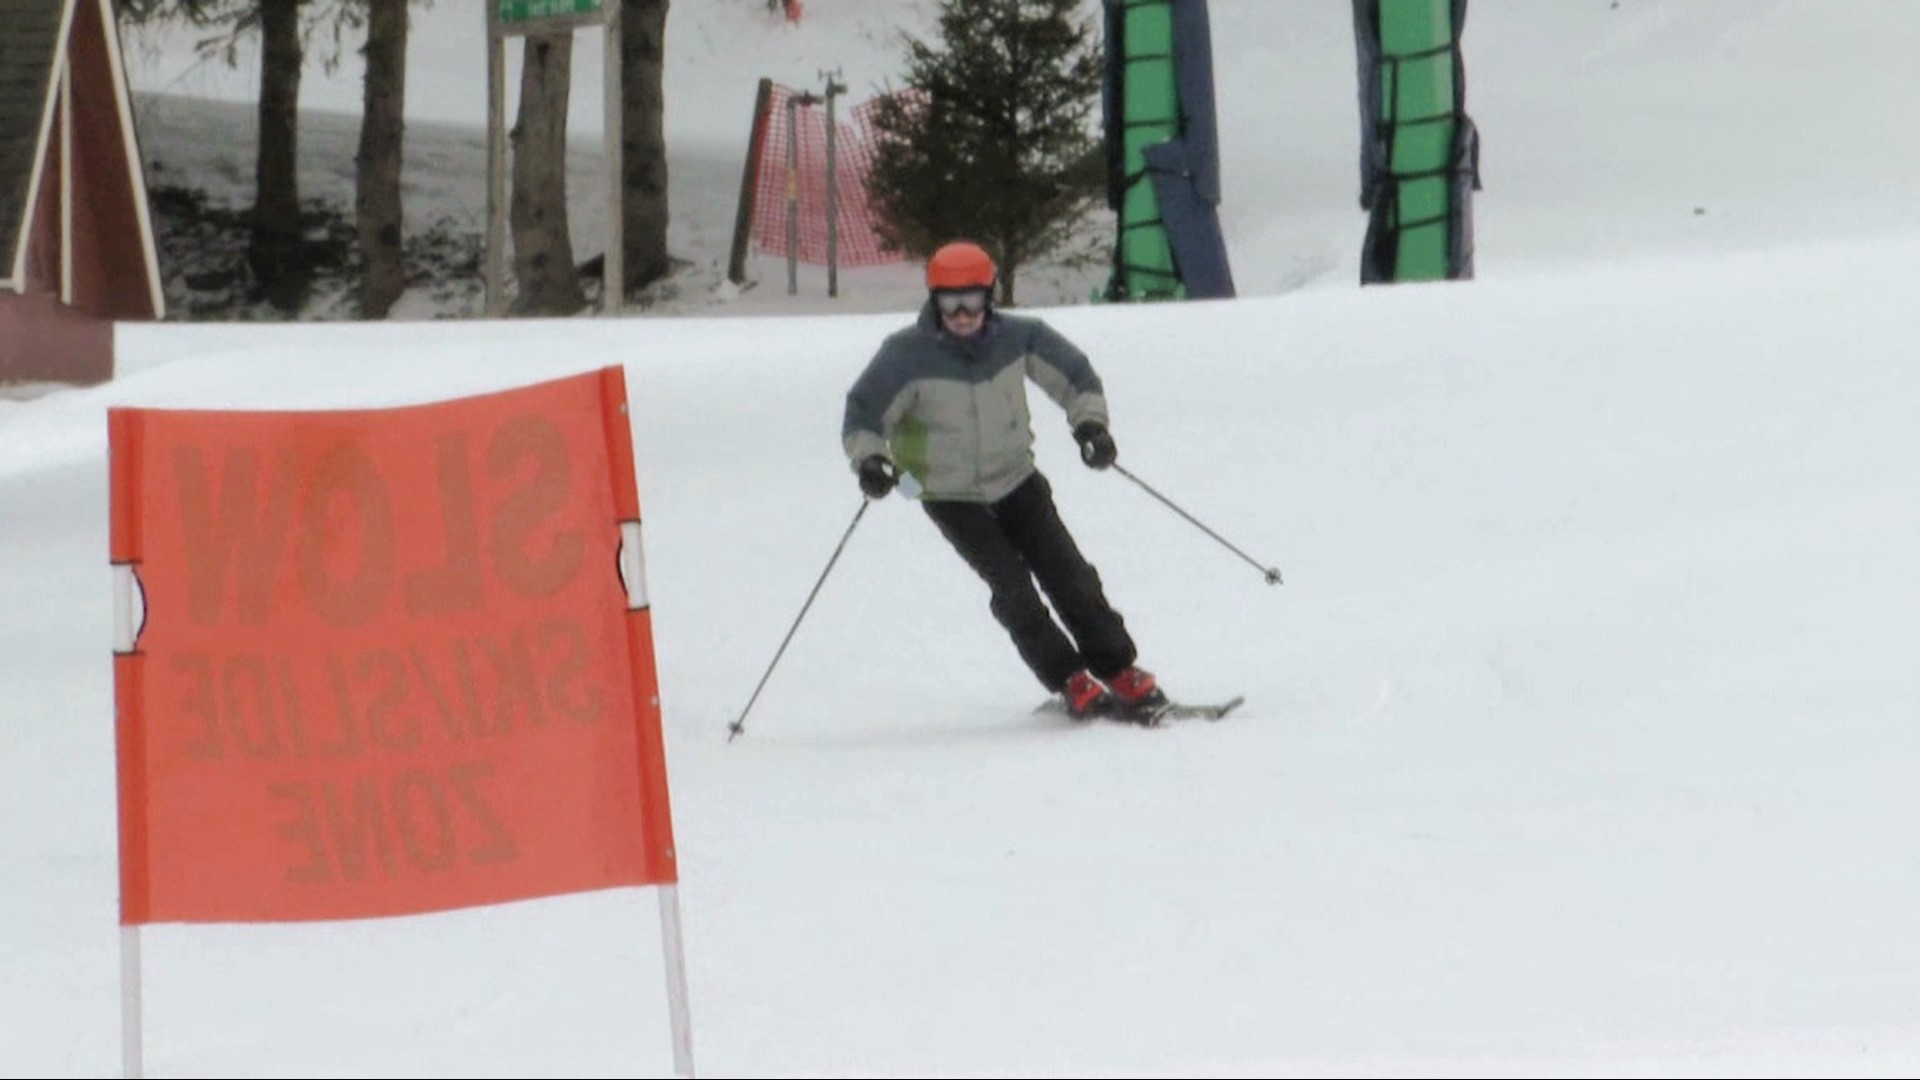 Newswatch 16's Courtney Harrison found skiers at Elk Mountain on Tuesday, riding on freshly manmade snow.